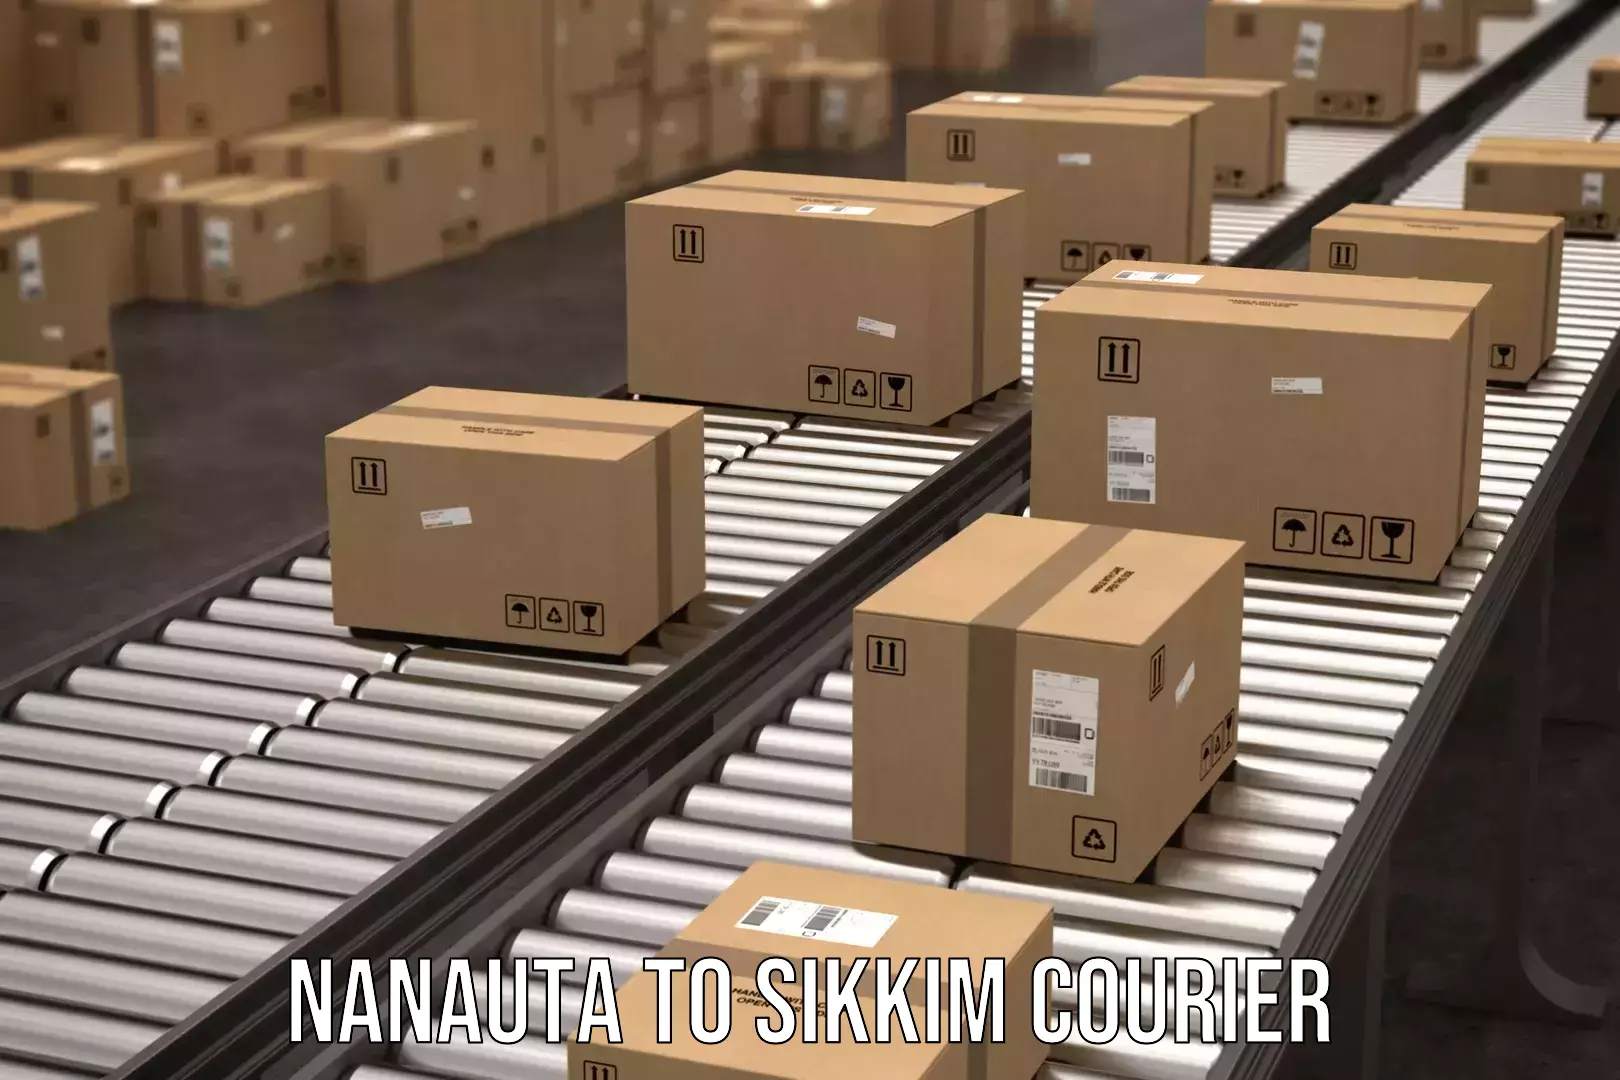 Parcel service for businesses Nanauta to Sikkim